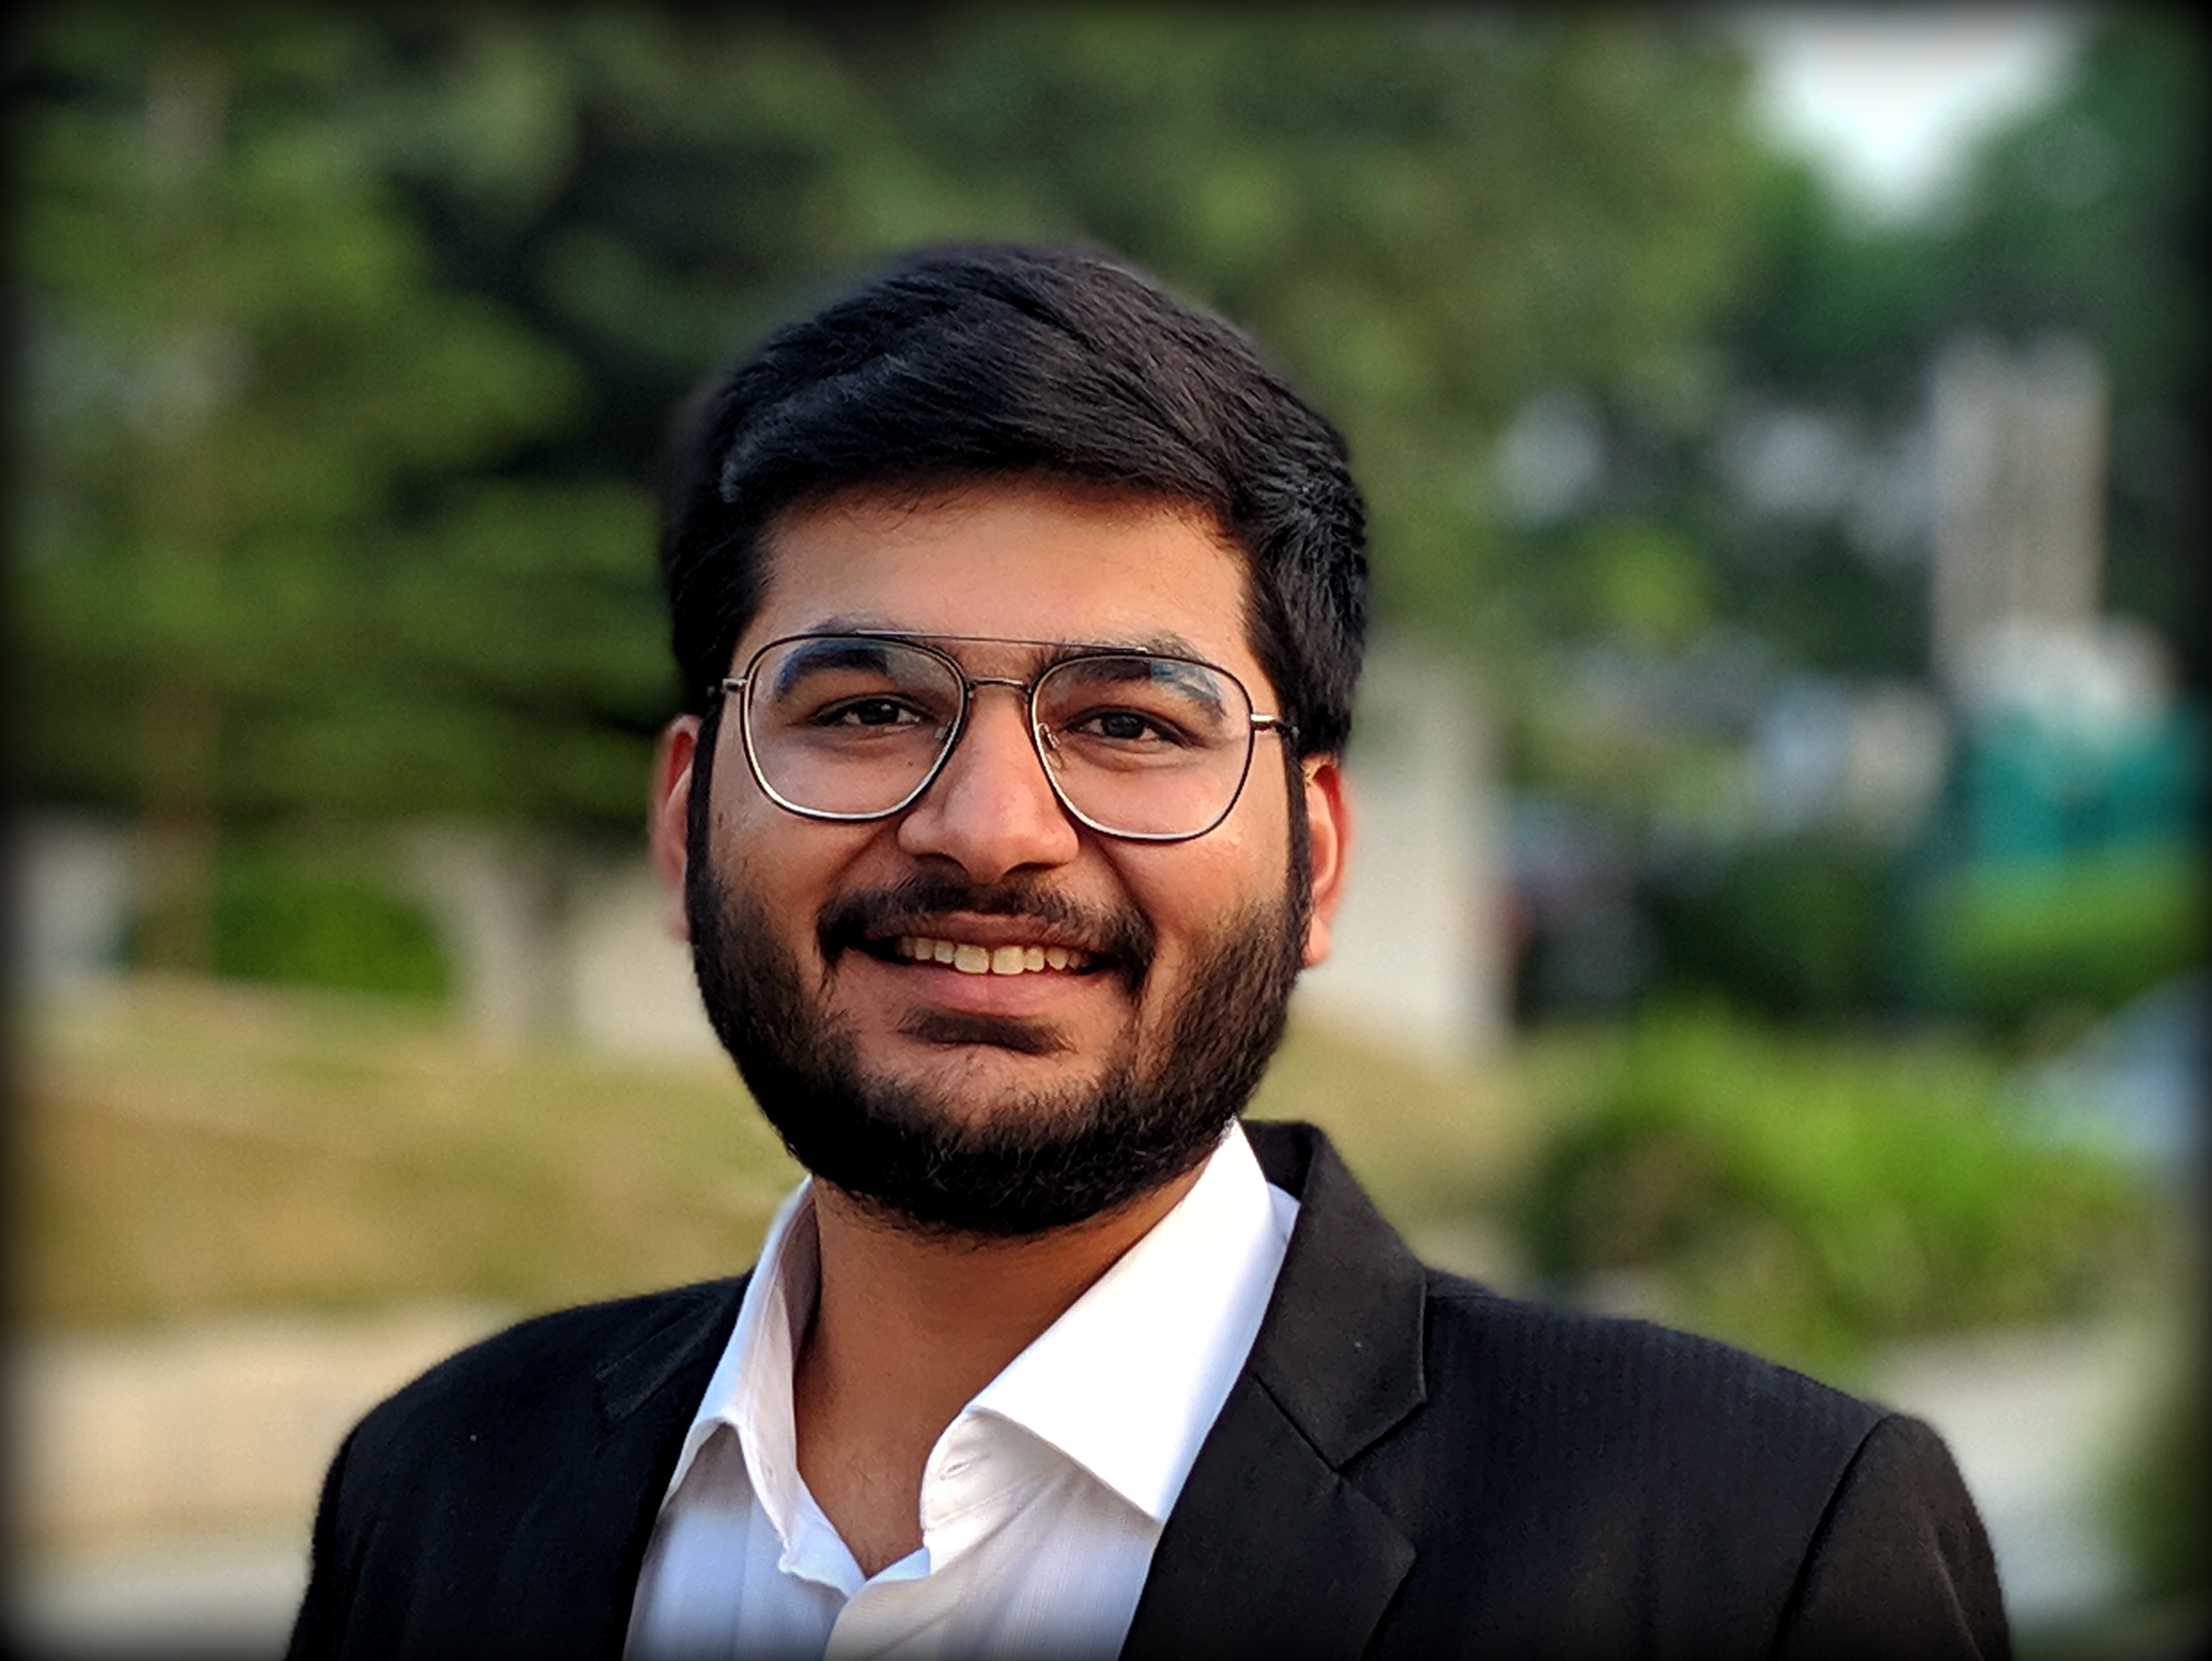 Great Lakes Institute of Management, Gurgaon, PGDM class of 2019-21 student Surya Jain talks about his opinions on the Reliance-Aramco deal and how it would benefit Mukesh Ambani's conglomerate and the world's largest corporation.